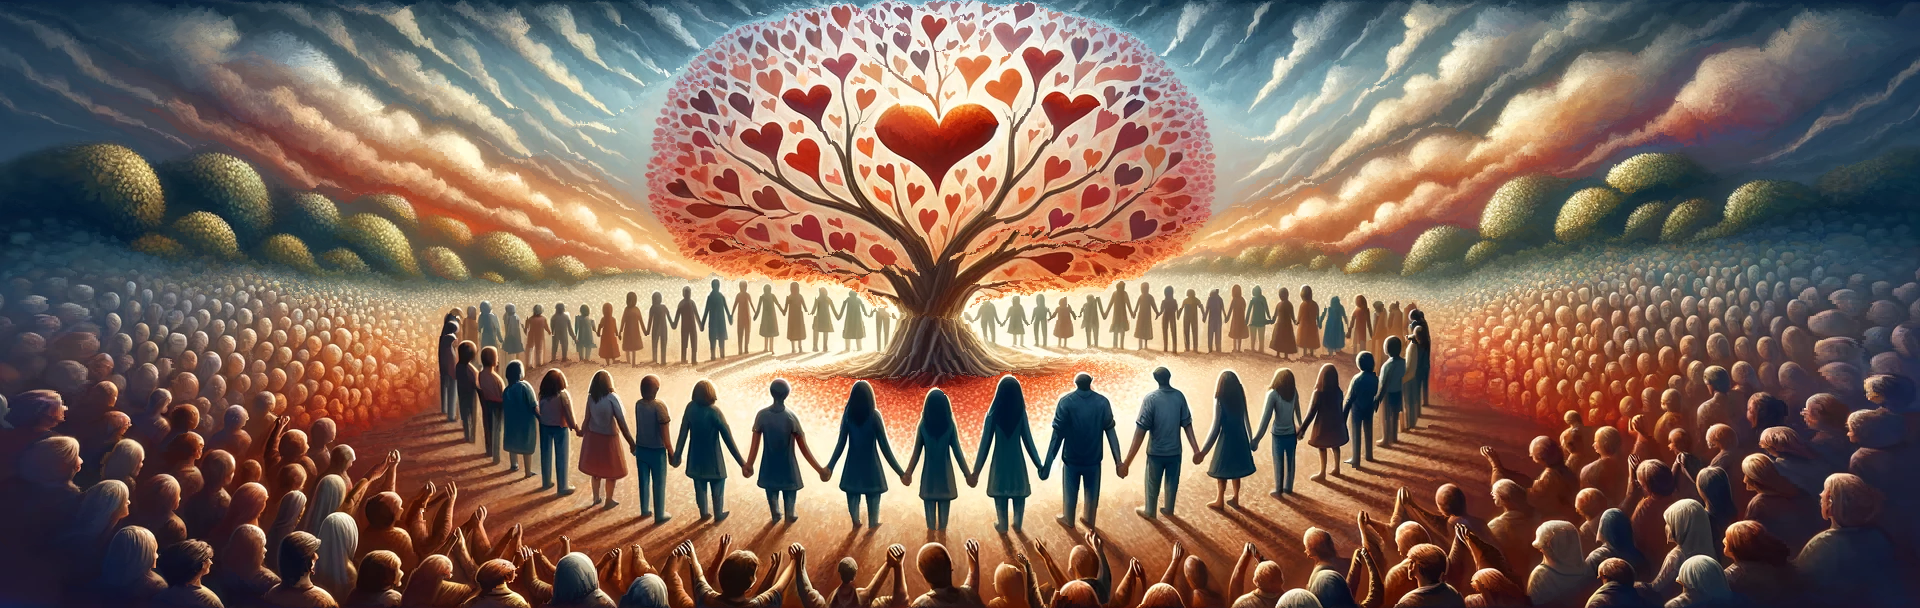 Two groups of people with interlocked hands standing in a circle around a tree filled with hearts. The image symbolize Love and Unity.